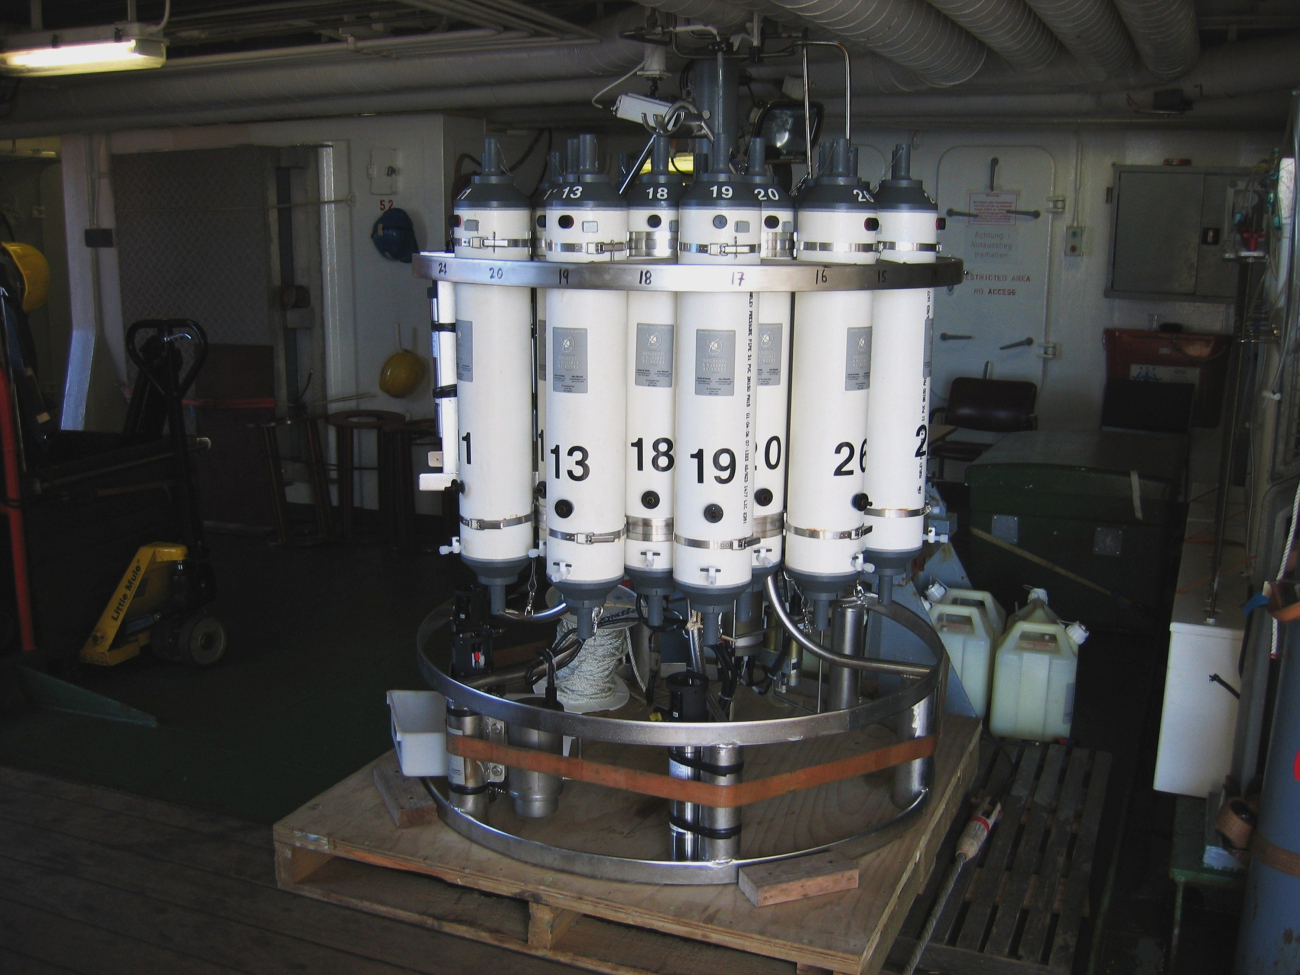 The conductivity-temperature-depth (CTD) package